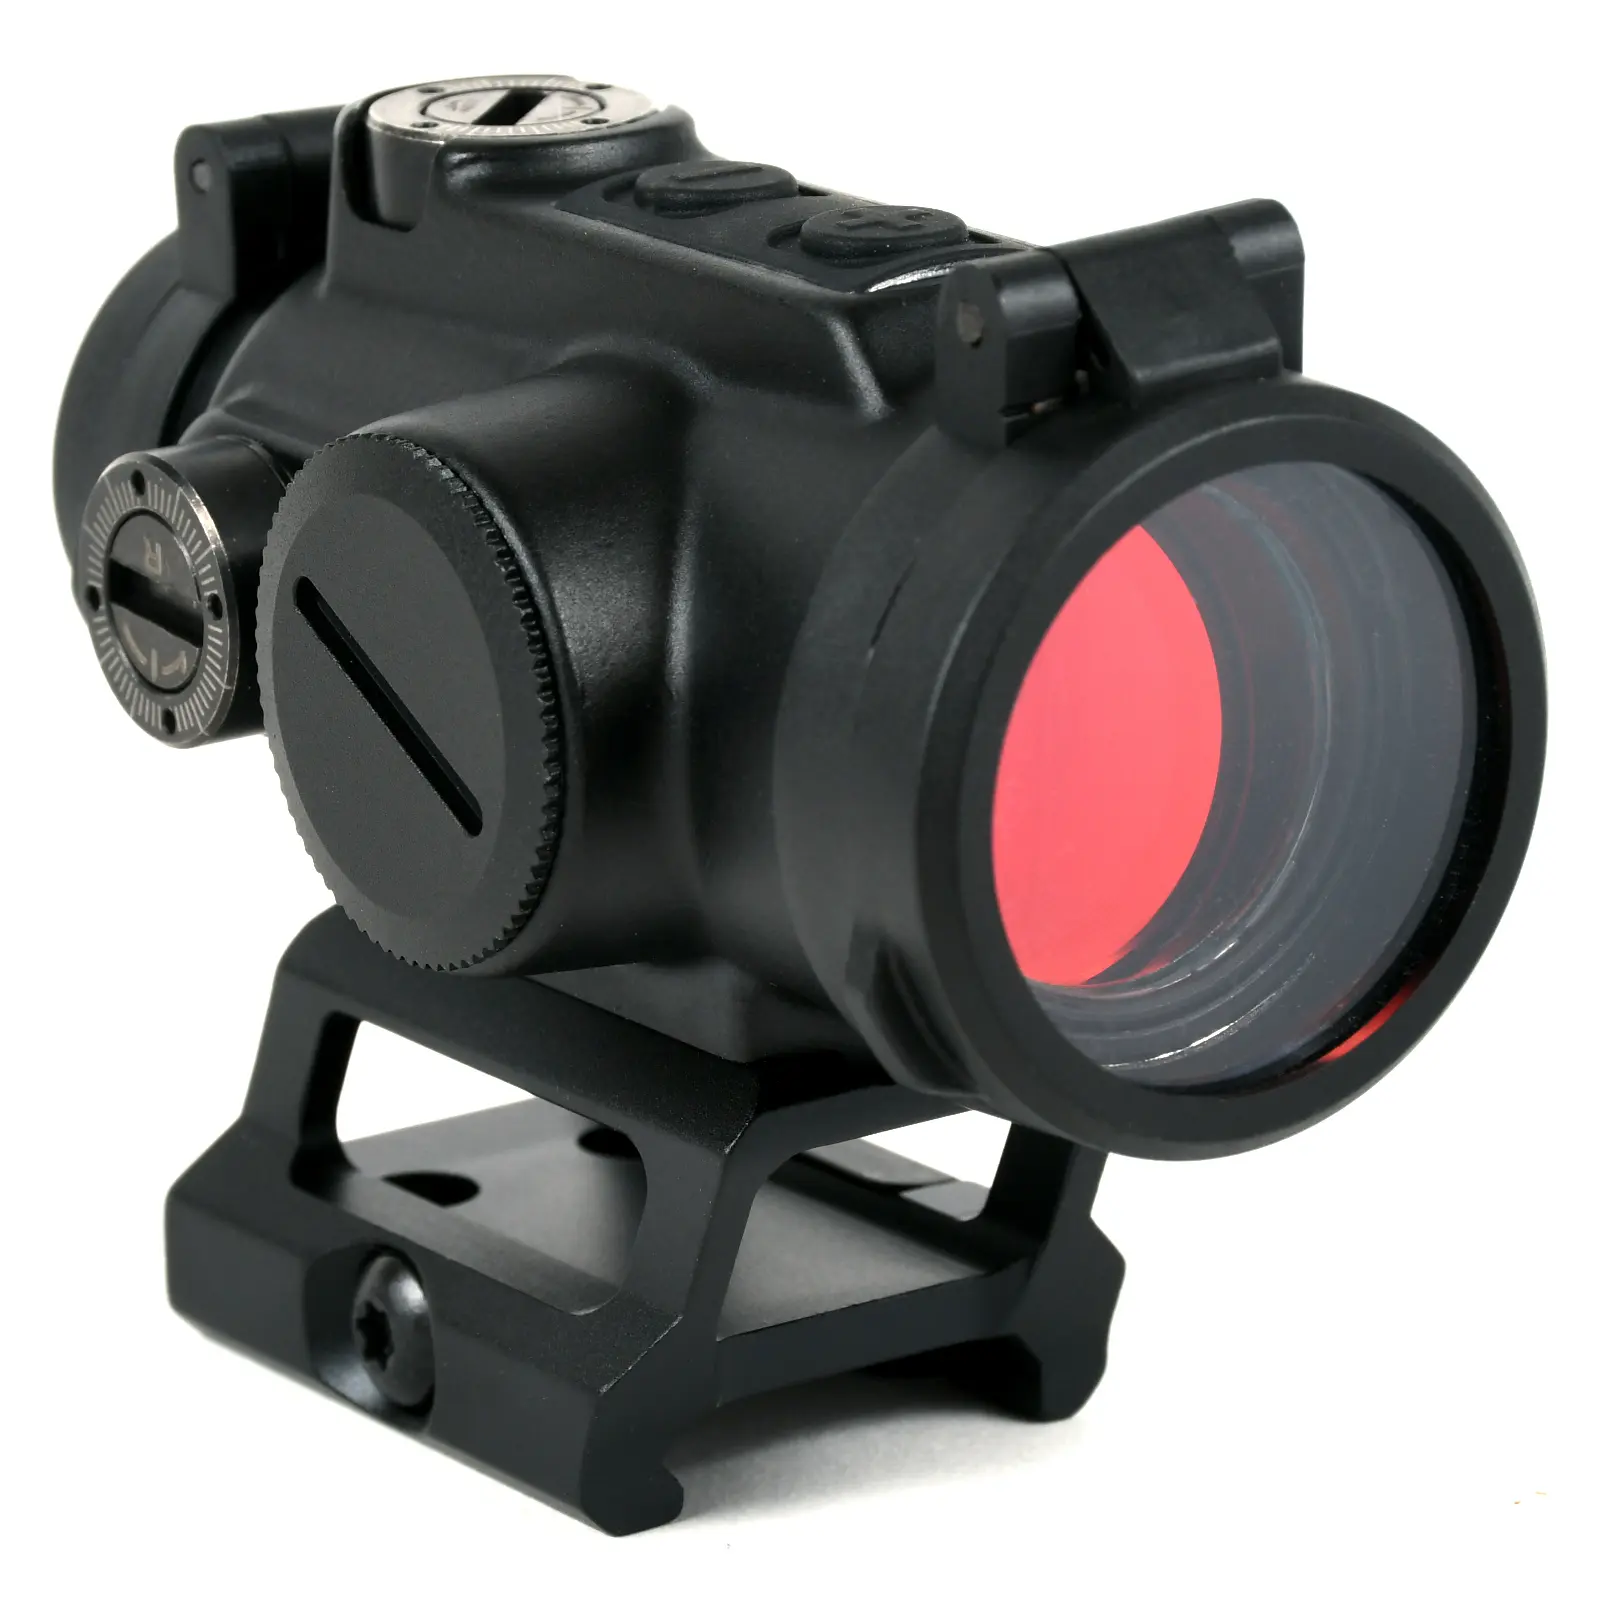 AT3™ RCO™ Red Dot Sight with Circle Dot Reticle and Variable Riser Mounts